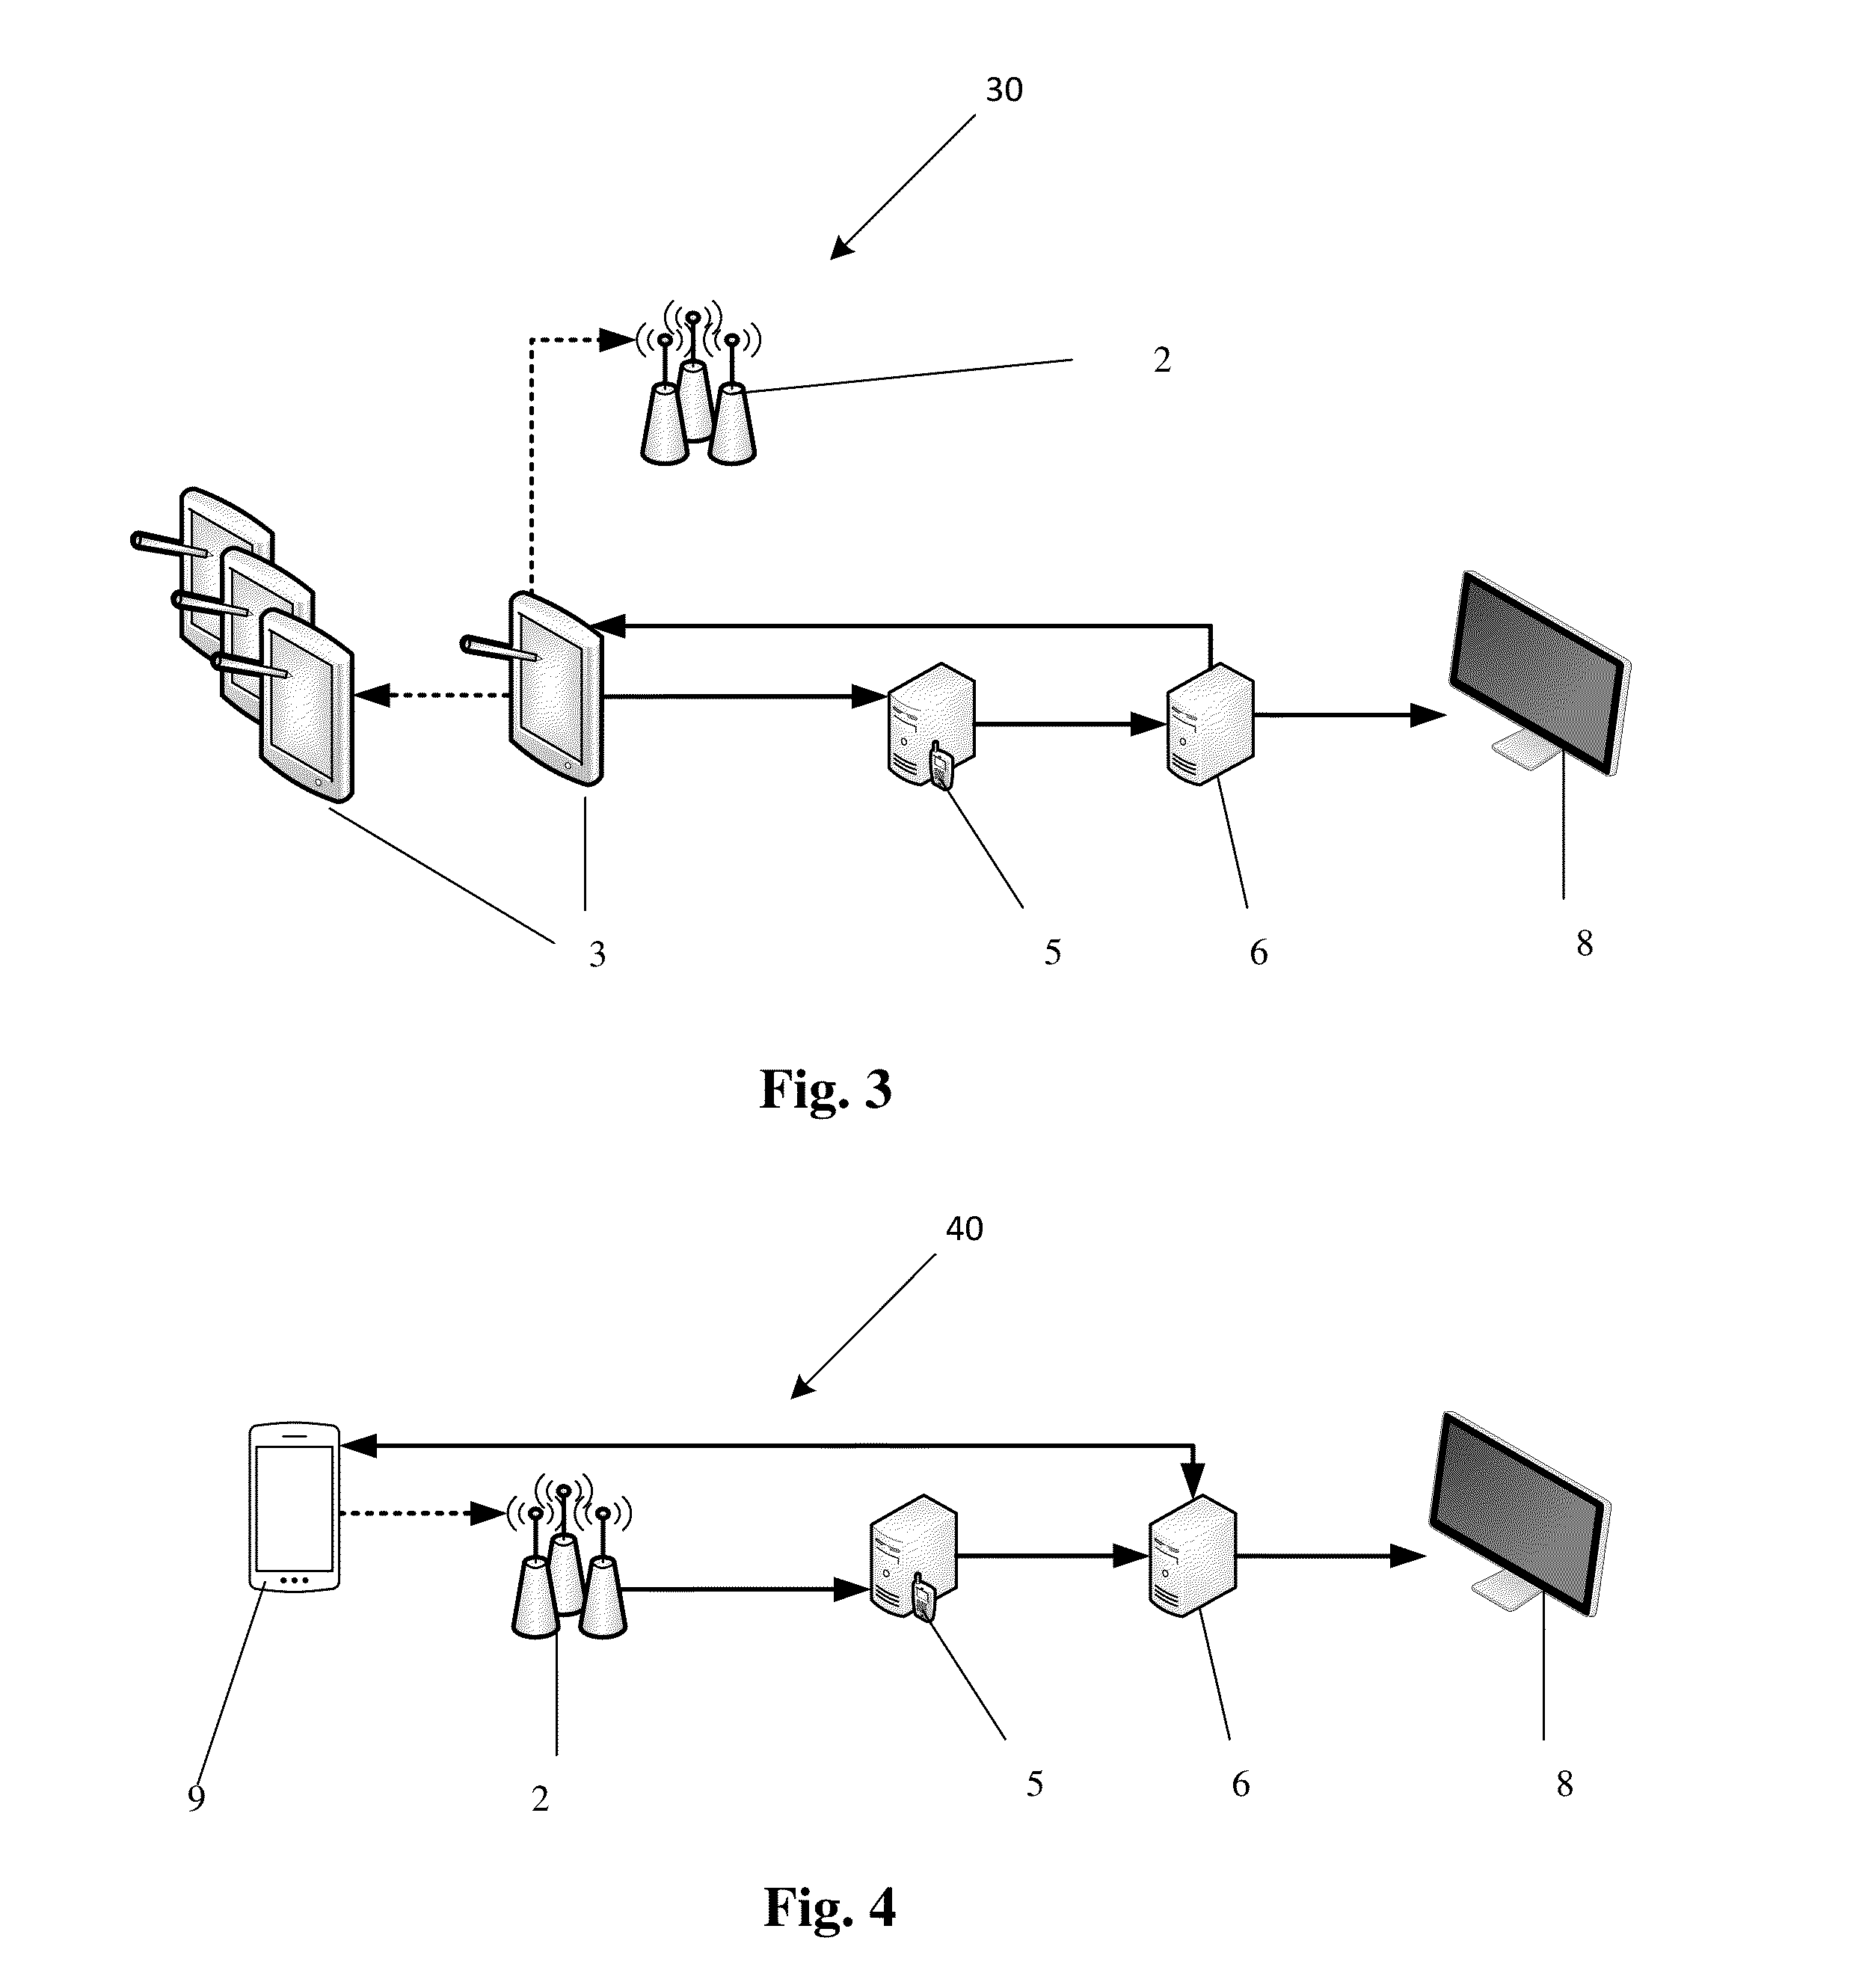 Method and system for using location services to teach concepts